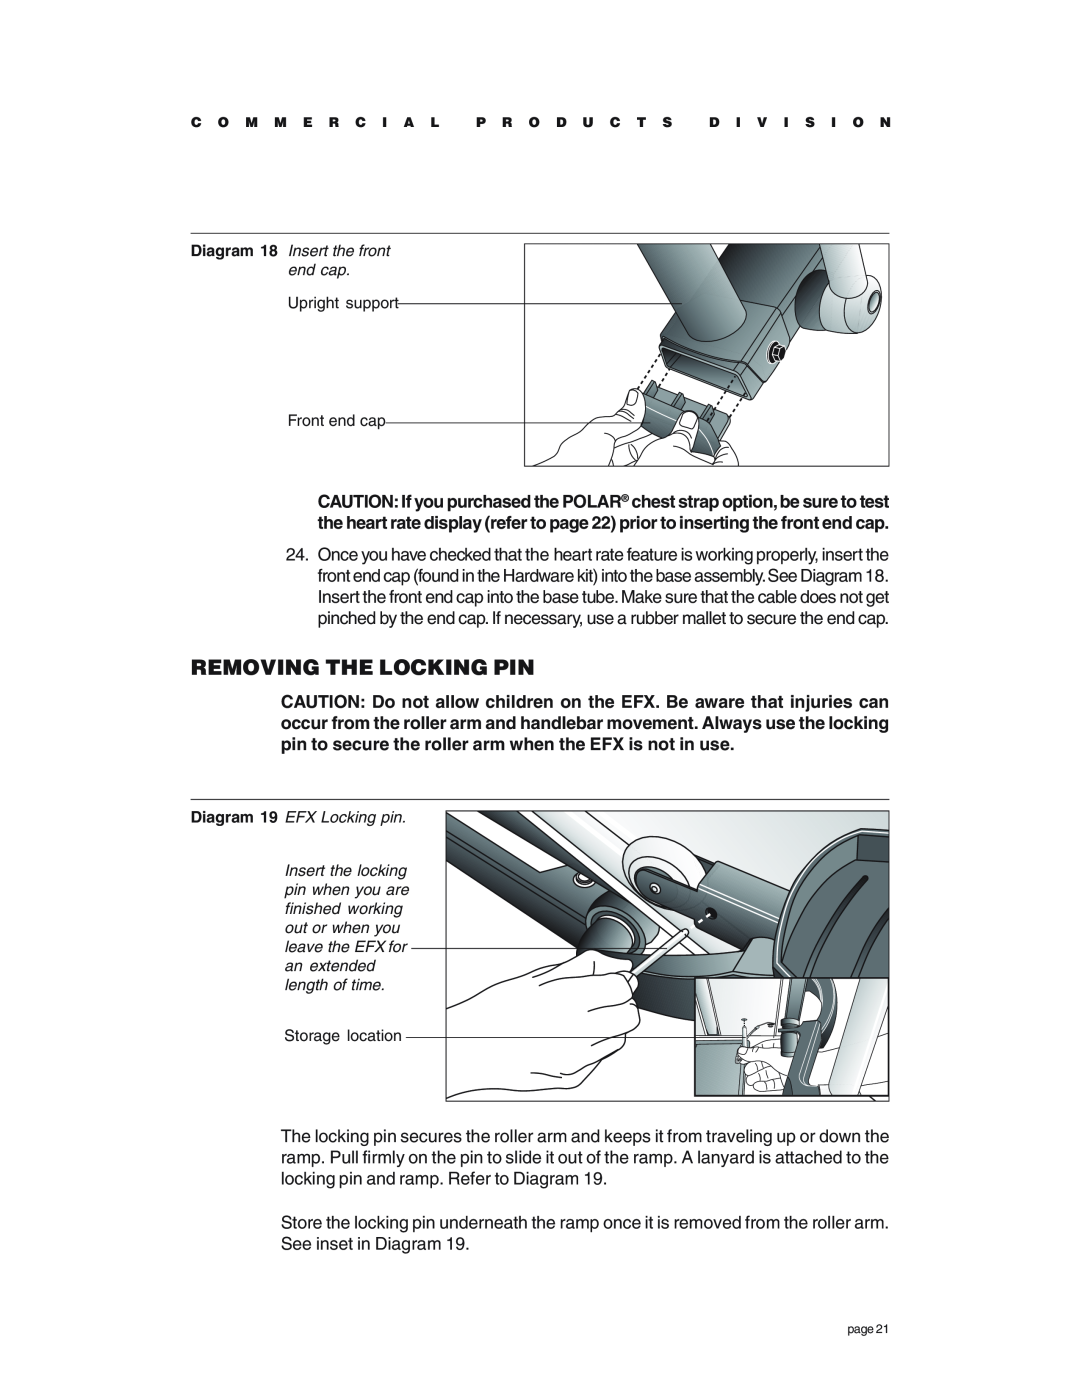 Precor EFX534 owner manual Removing The Locking Pin, Diagram 18 Insert the front end cap, Diagram 19 EFX Locking pin 